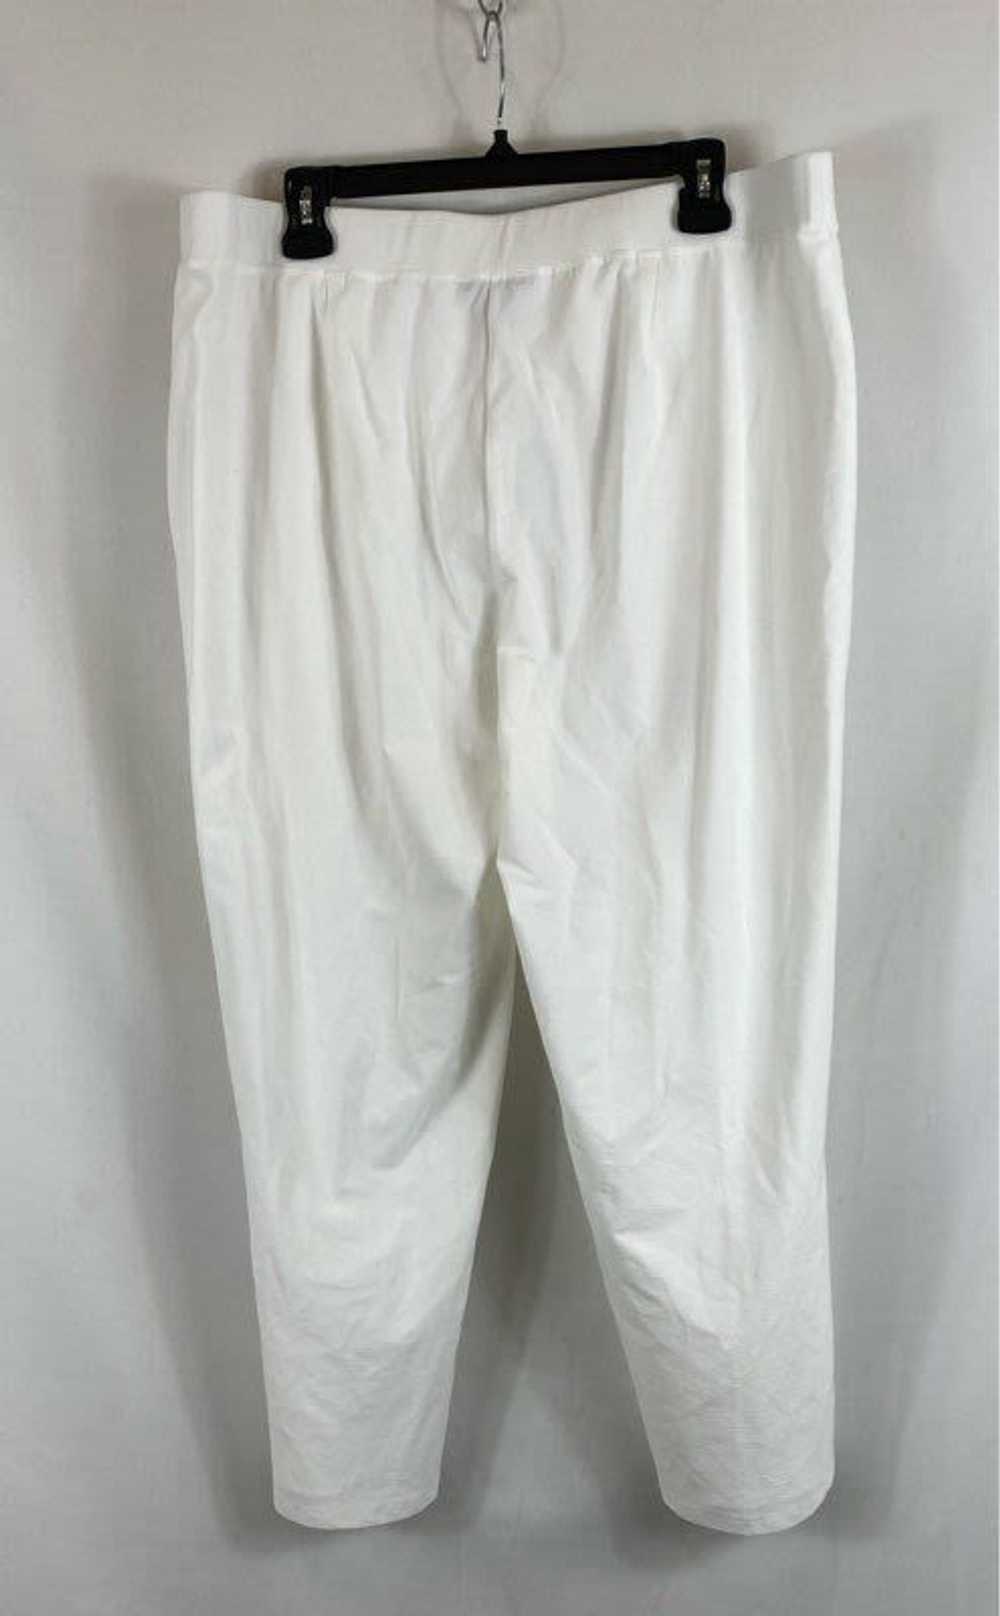 Eileen Fisher White Pants - Size X Large - image 2